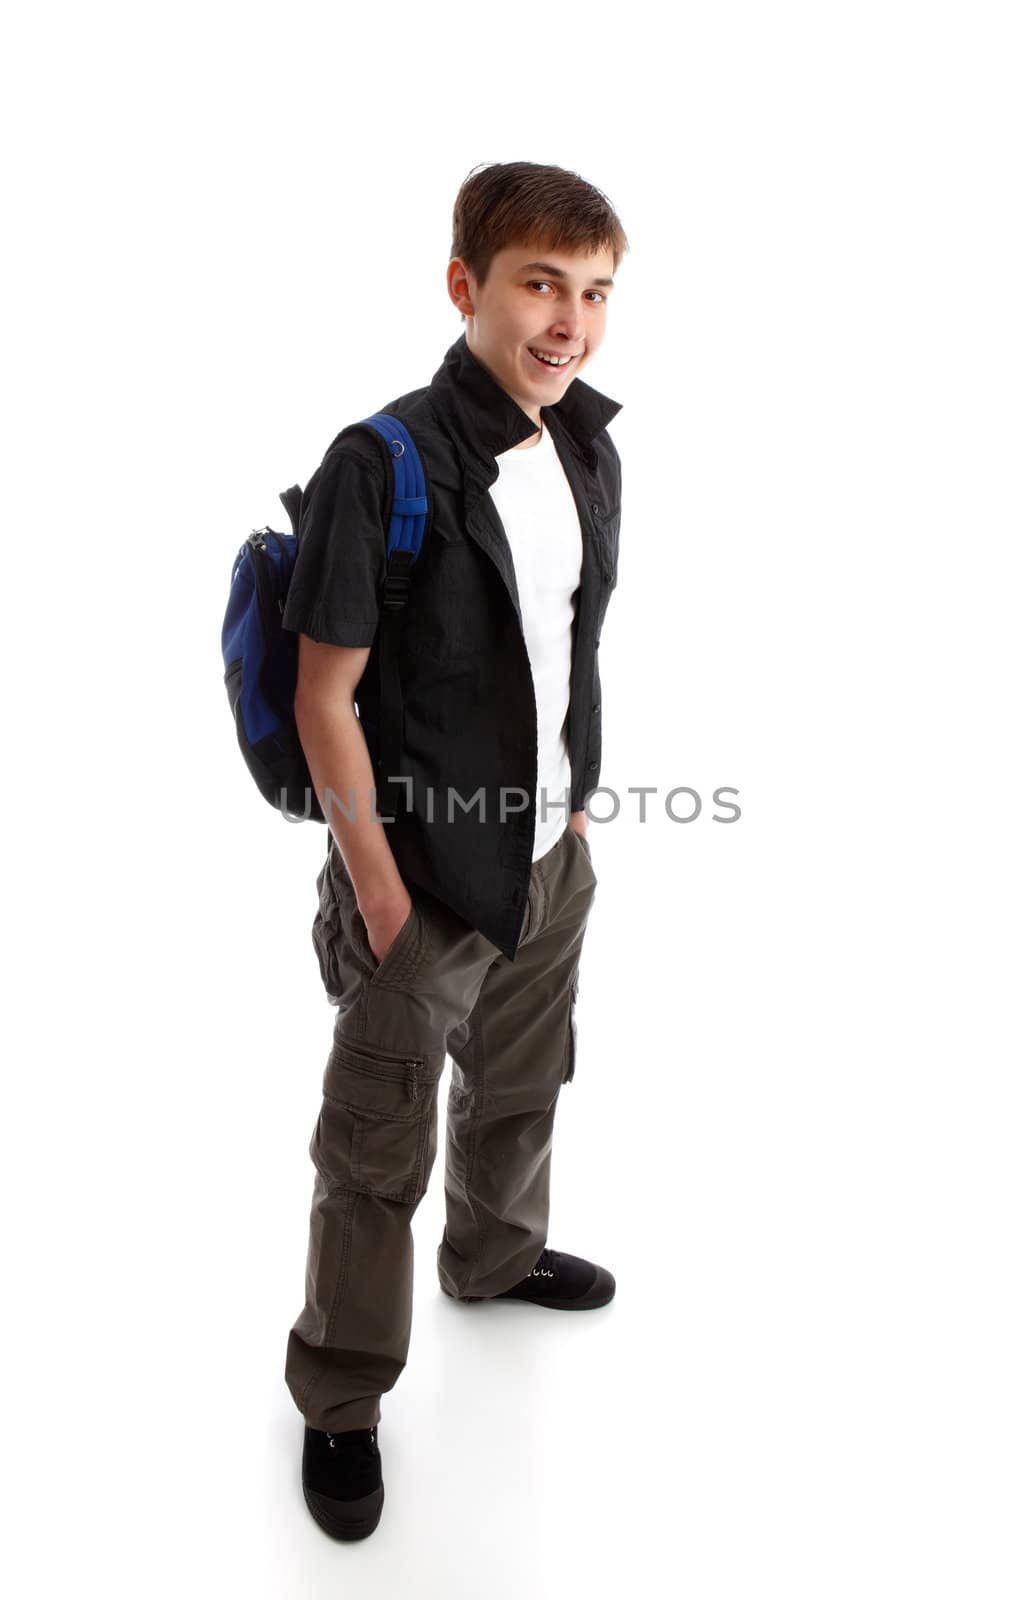 Student teenager carrying a backpack and smiling against a white background.